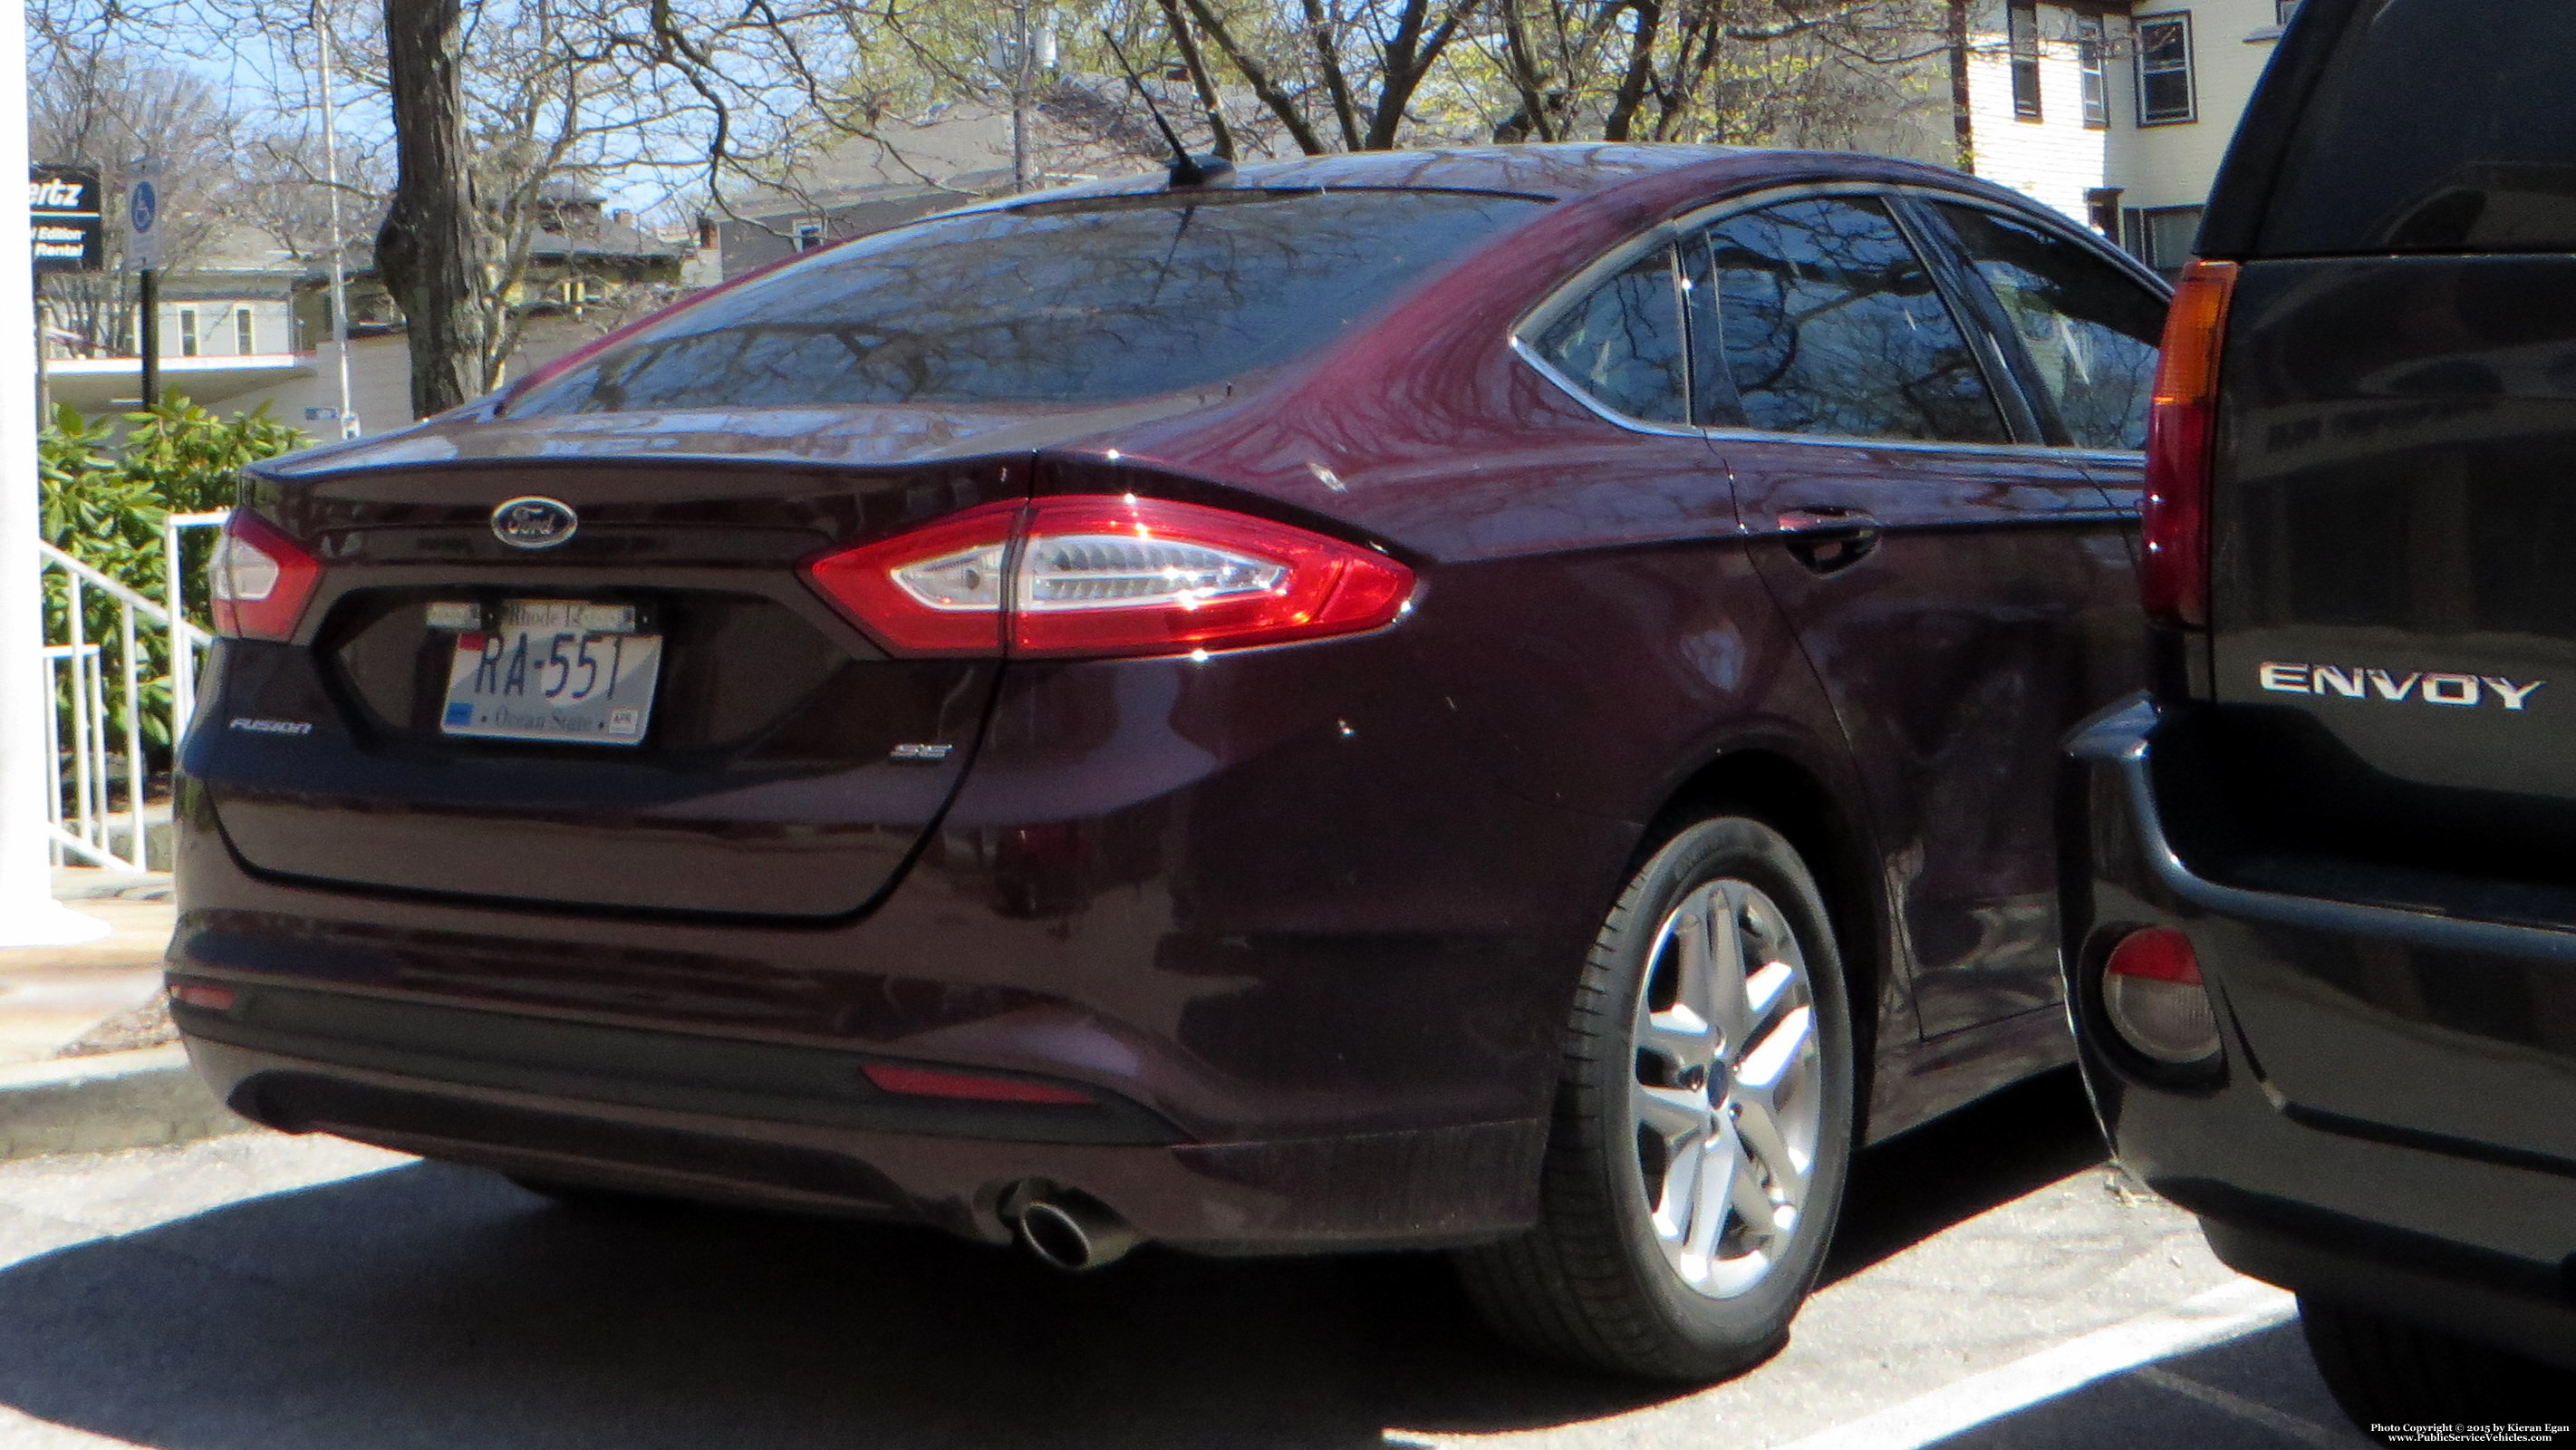 A photo  of Newport Police
            Unmarked Unit, a 2013-2014 Ford Fusion             taken by Kieran Egan